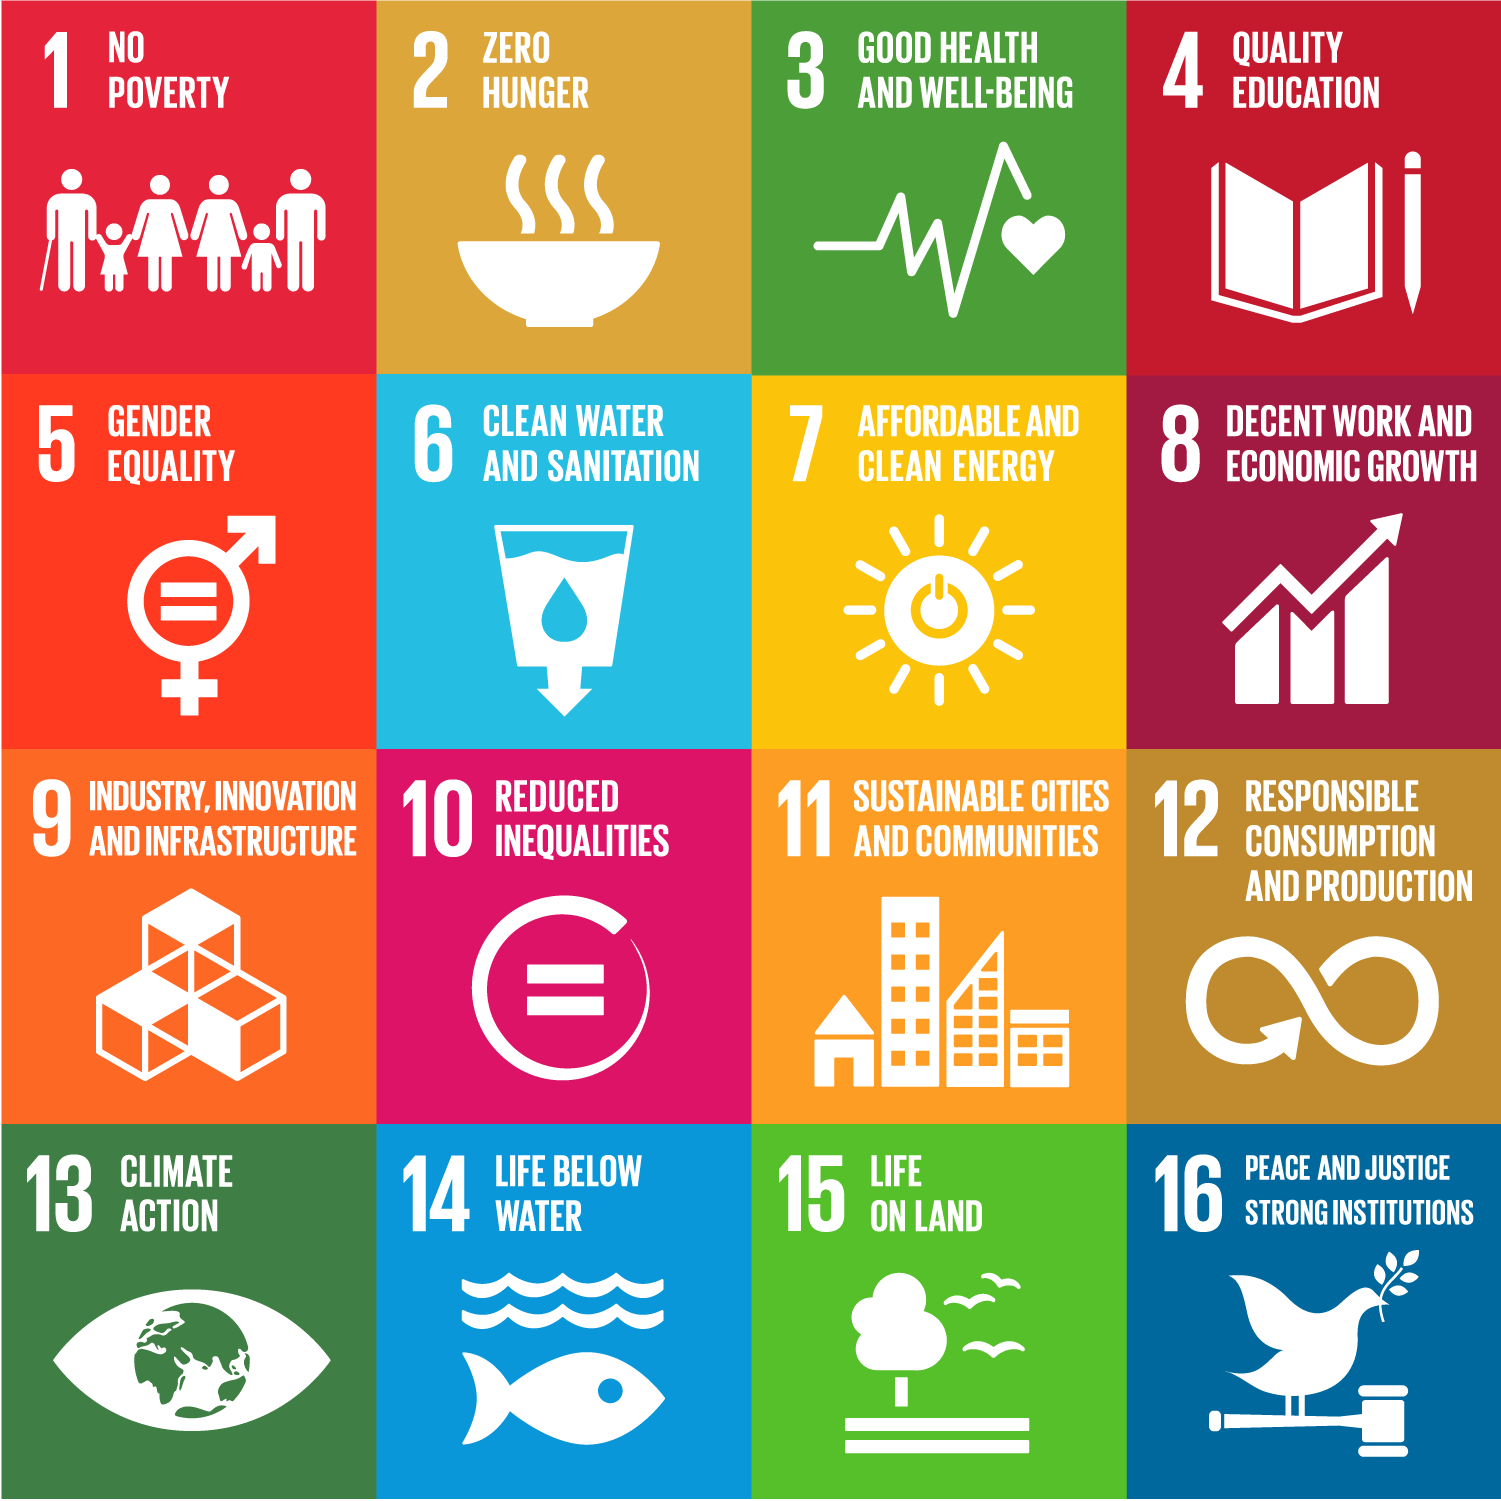 Path Financial is aligned with the UN Sustainable Development Goals